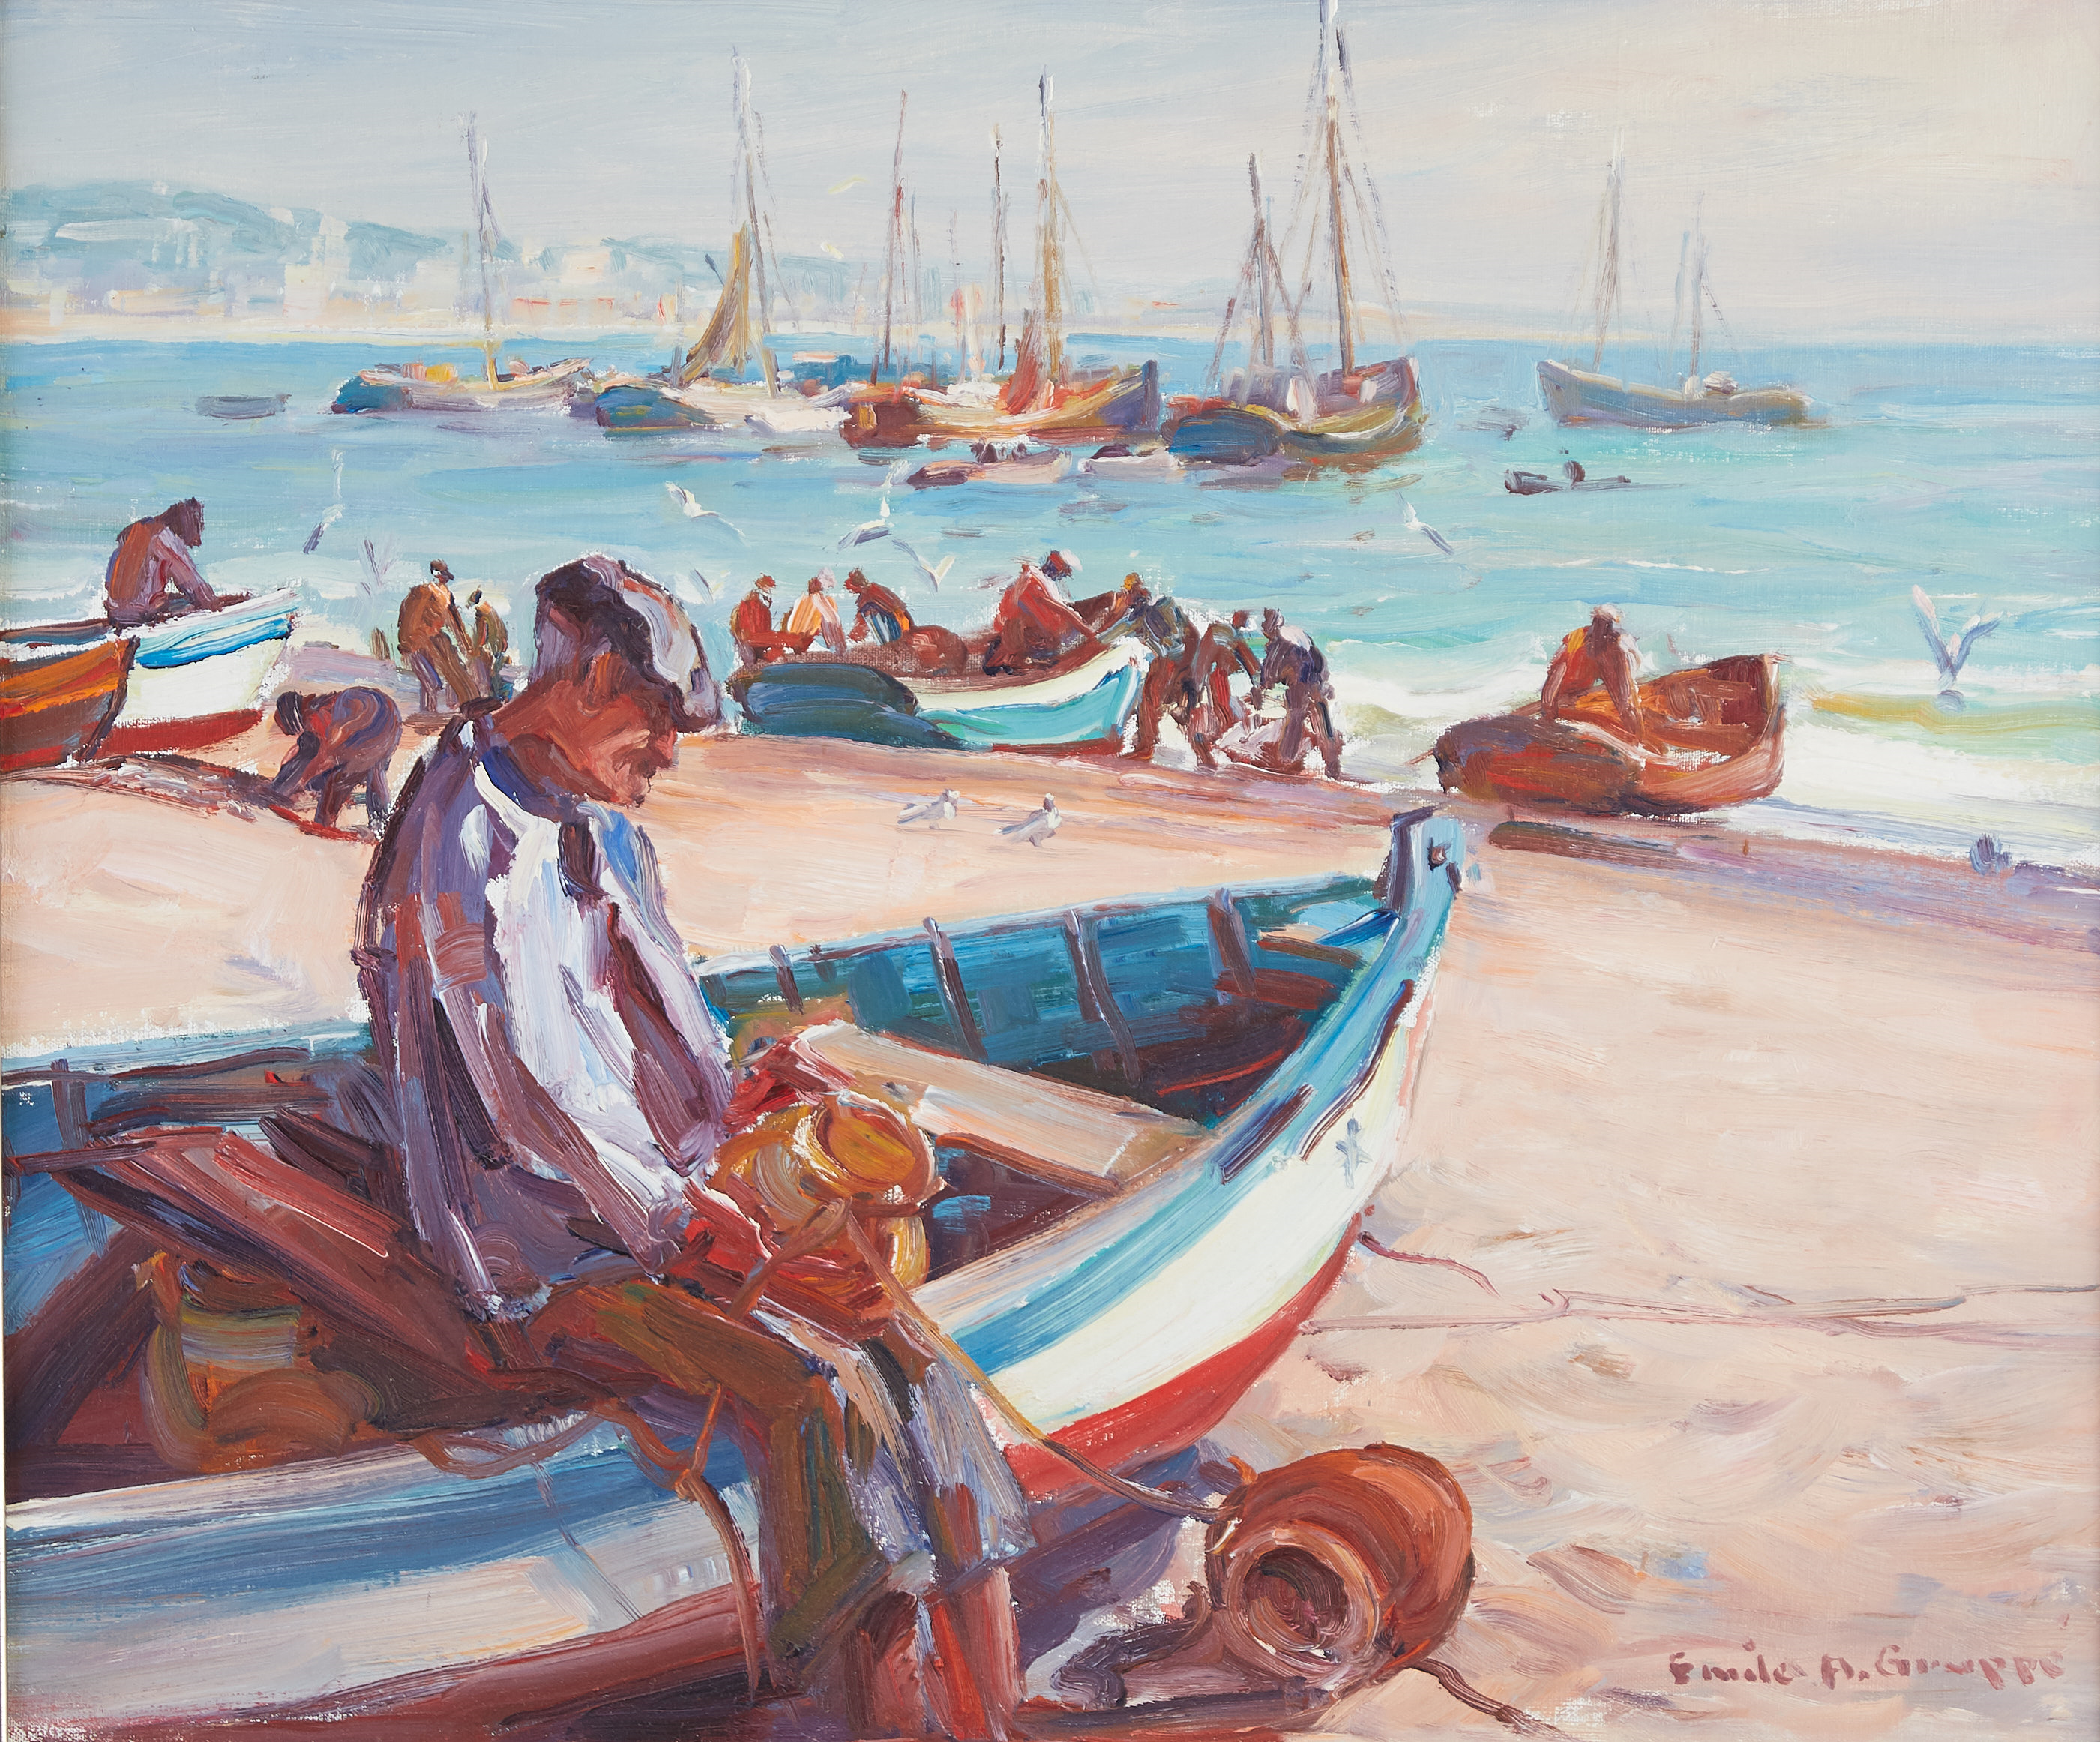 Lot 062: Emile Gruppe Oil on Canvas